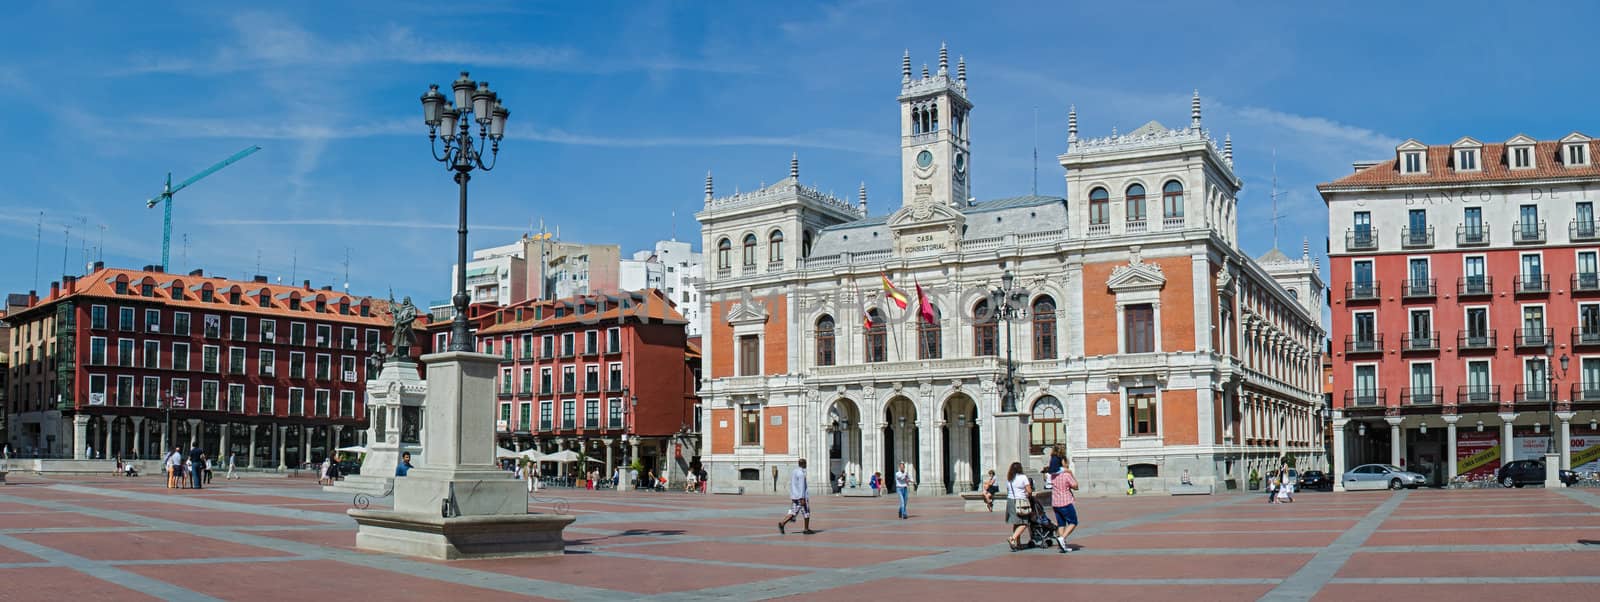 VALLADOLID, SPAIN – SEPTEMBER 22: The Plaza Mayor and the city hall of Valladolid on September 22, 2012 on Valladolid, Castilla y Leon, Spain. The main square is the first place arcades closed in Spain.